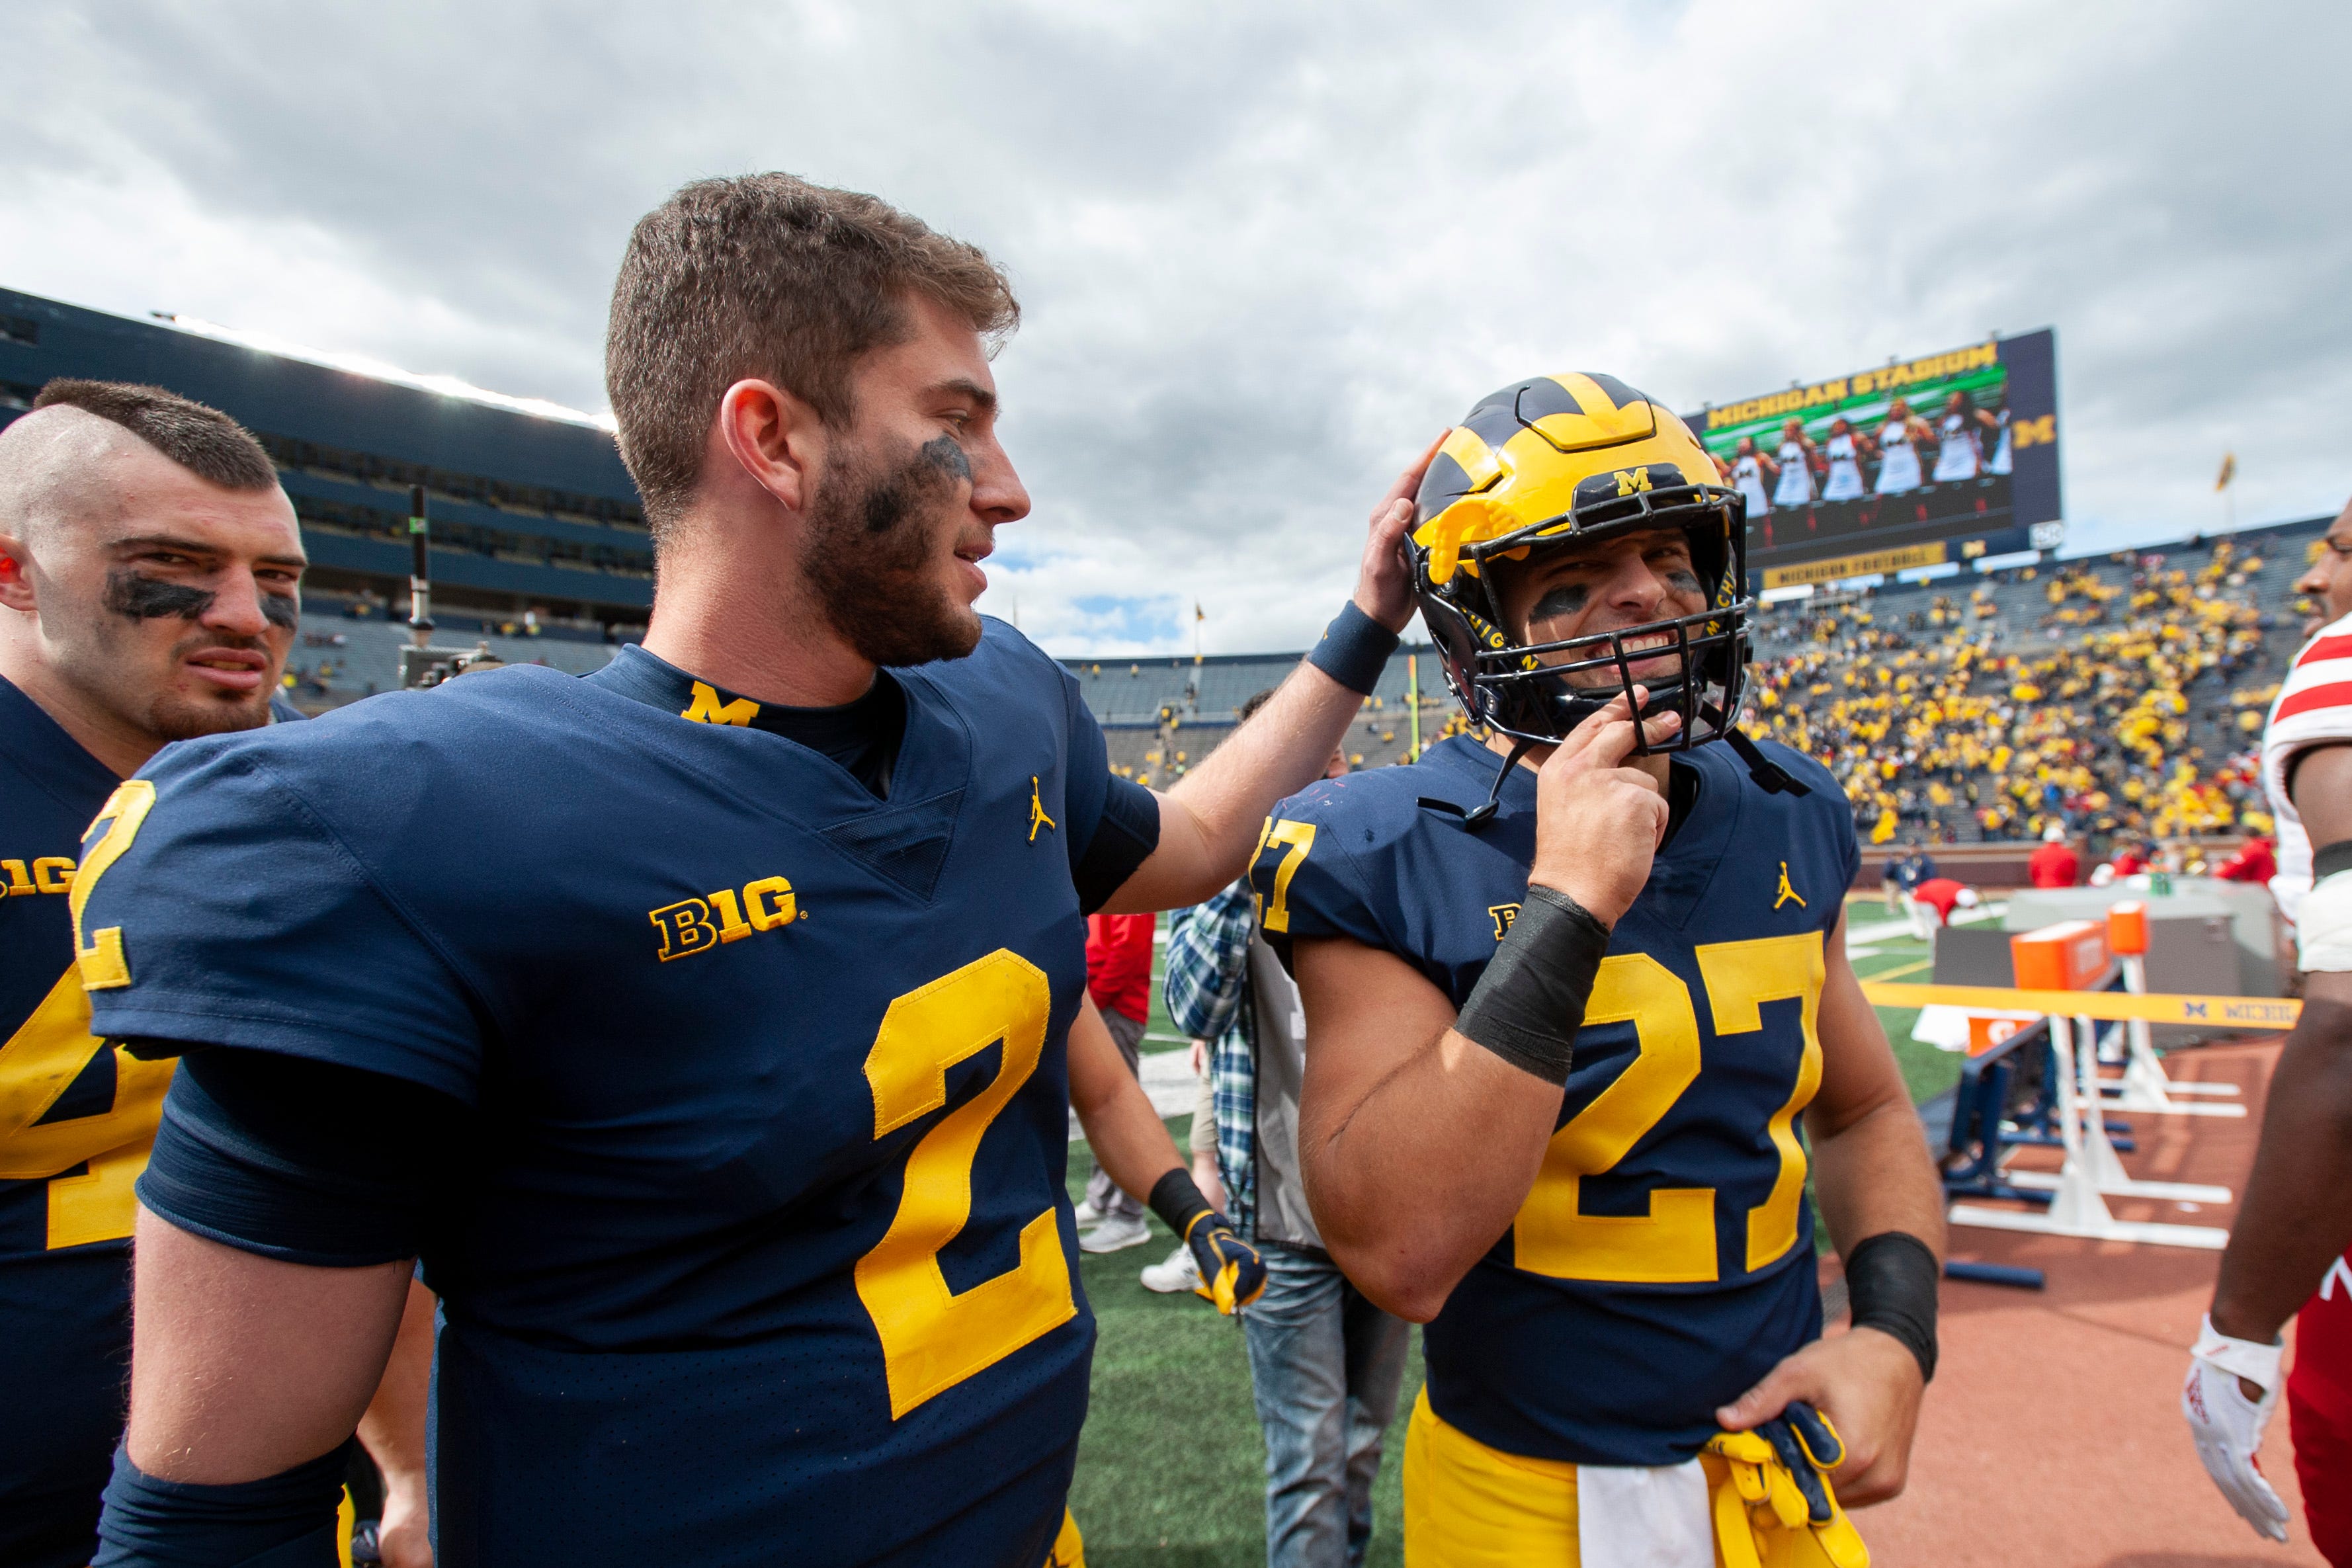 Michigan quarterback Shea Patterson, left, and running back Joe Hewlett walk off the field together after the game against Nebraska.